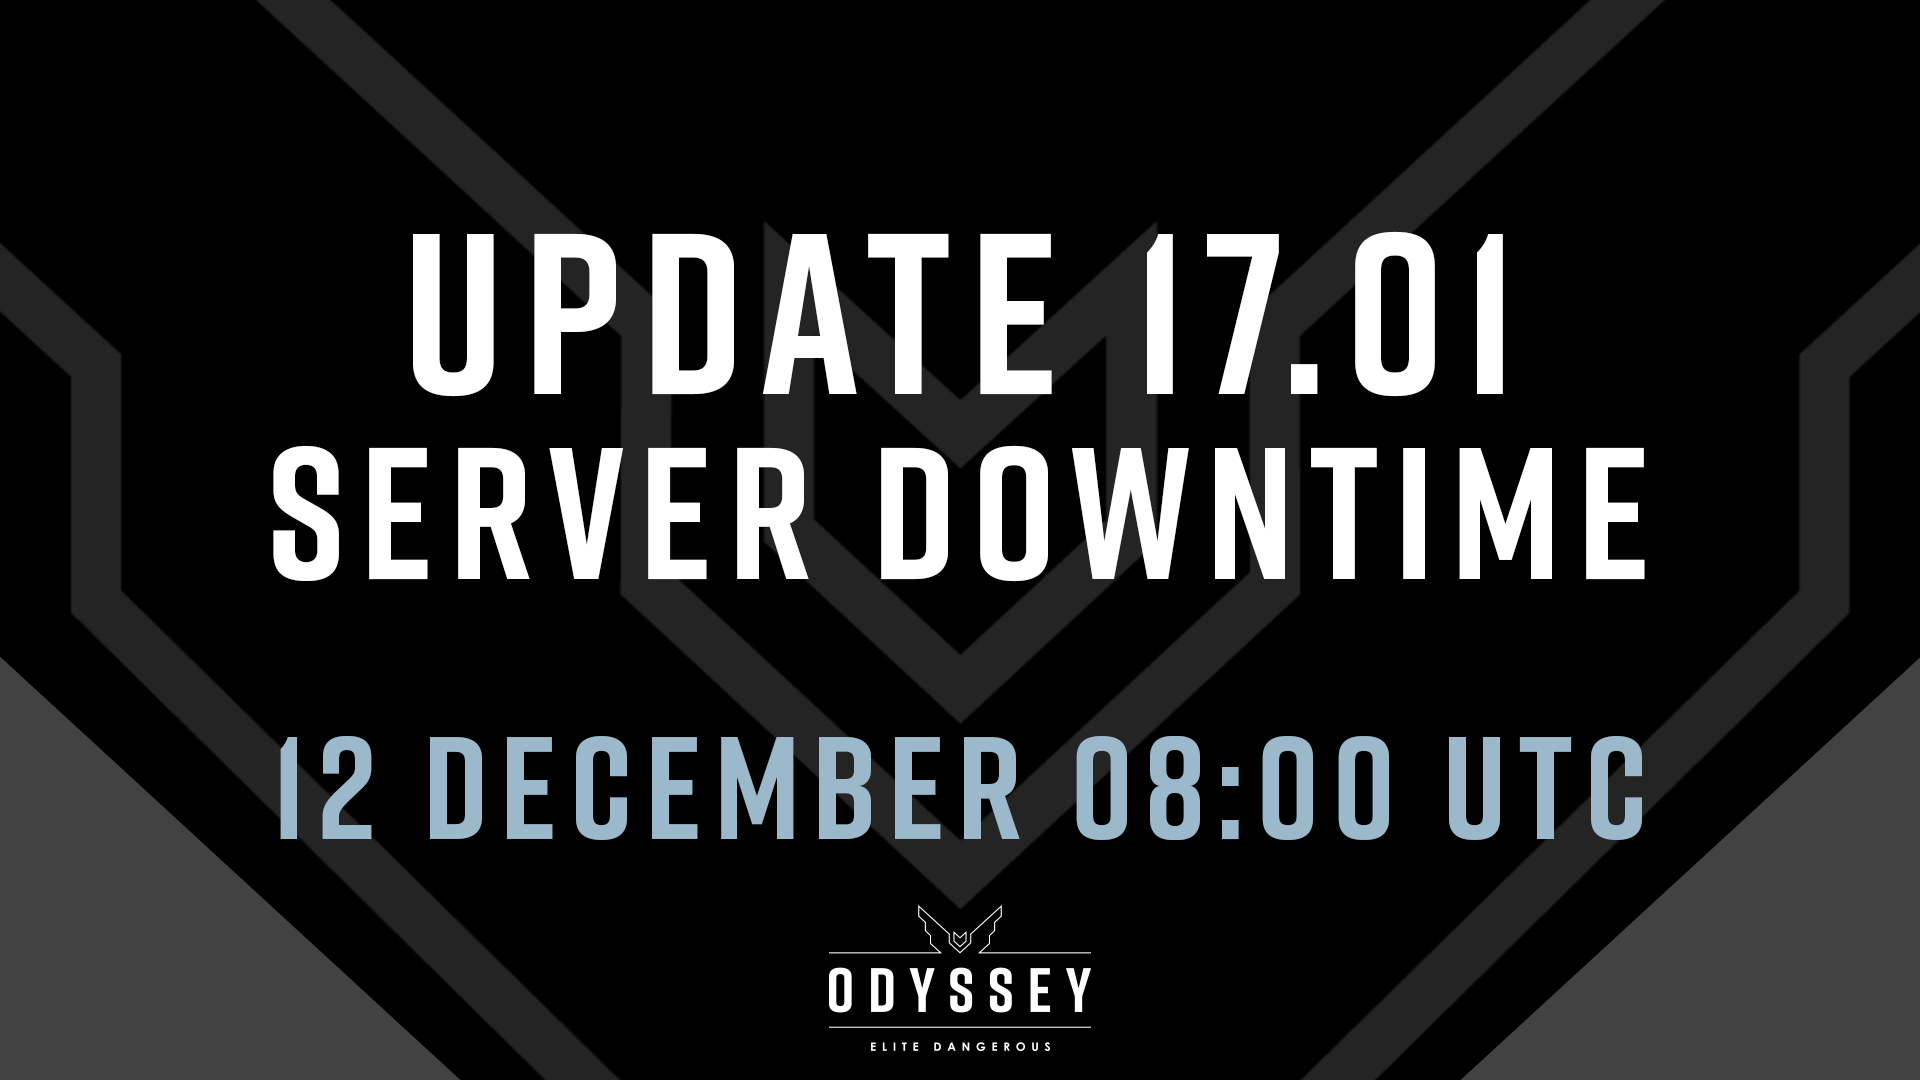 update17-01-downtime-png.377673